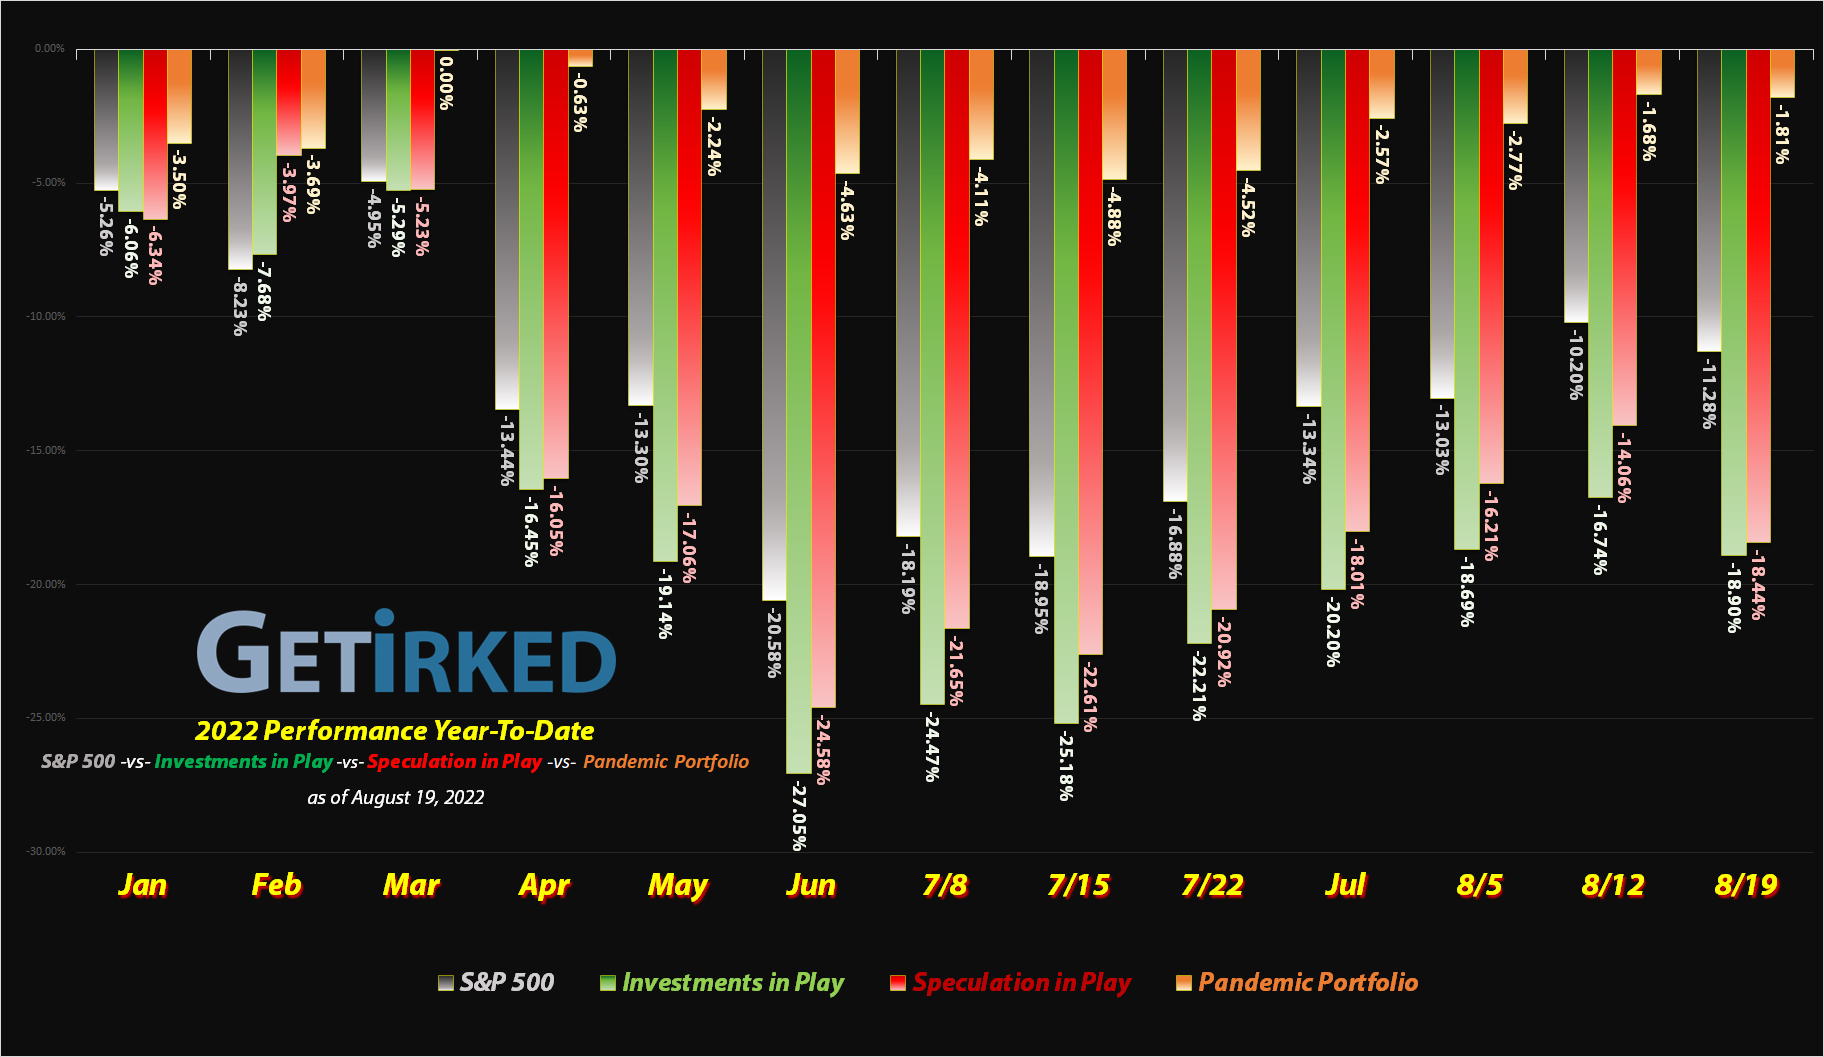 Get Irked - Year-to-Date Performance - Investments in Play vs. Speculation in Play - 2022 Year-to-Date Performance